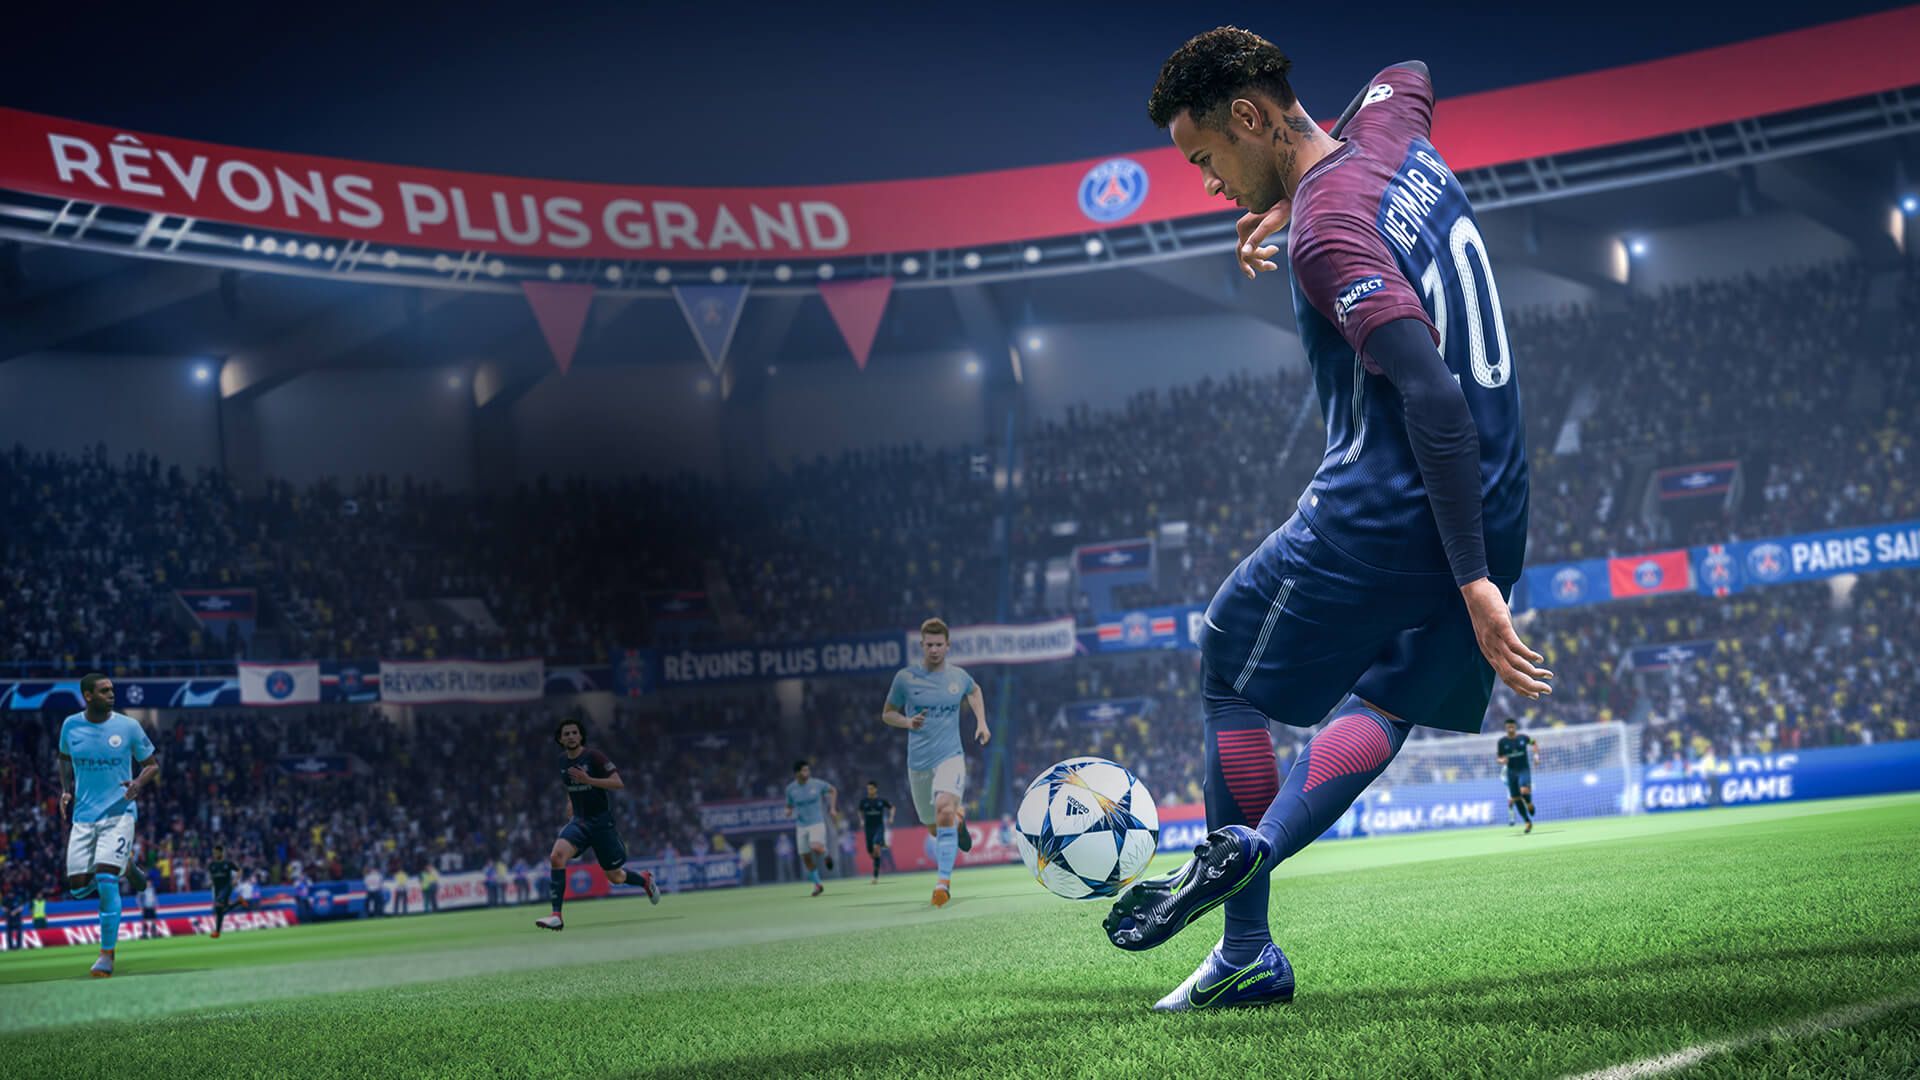 download fifa 22 pc for free